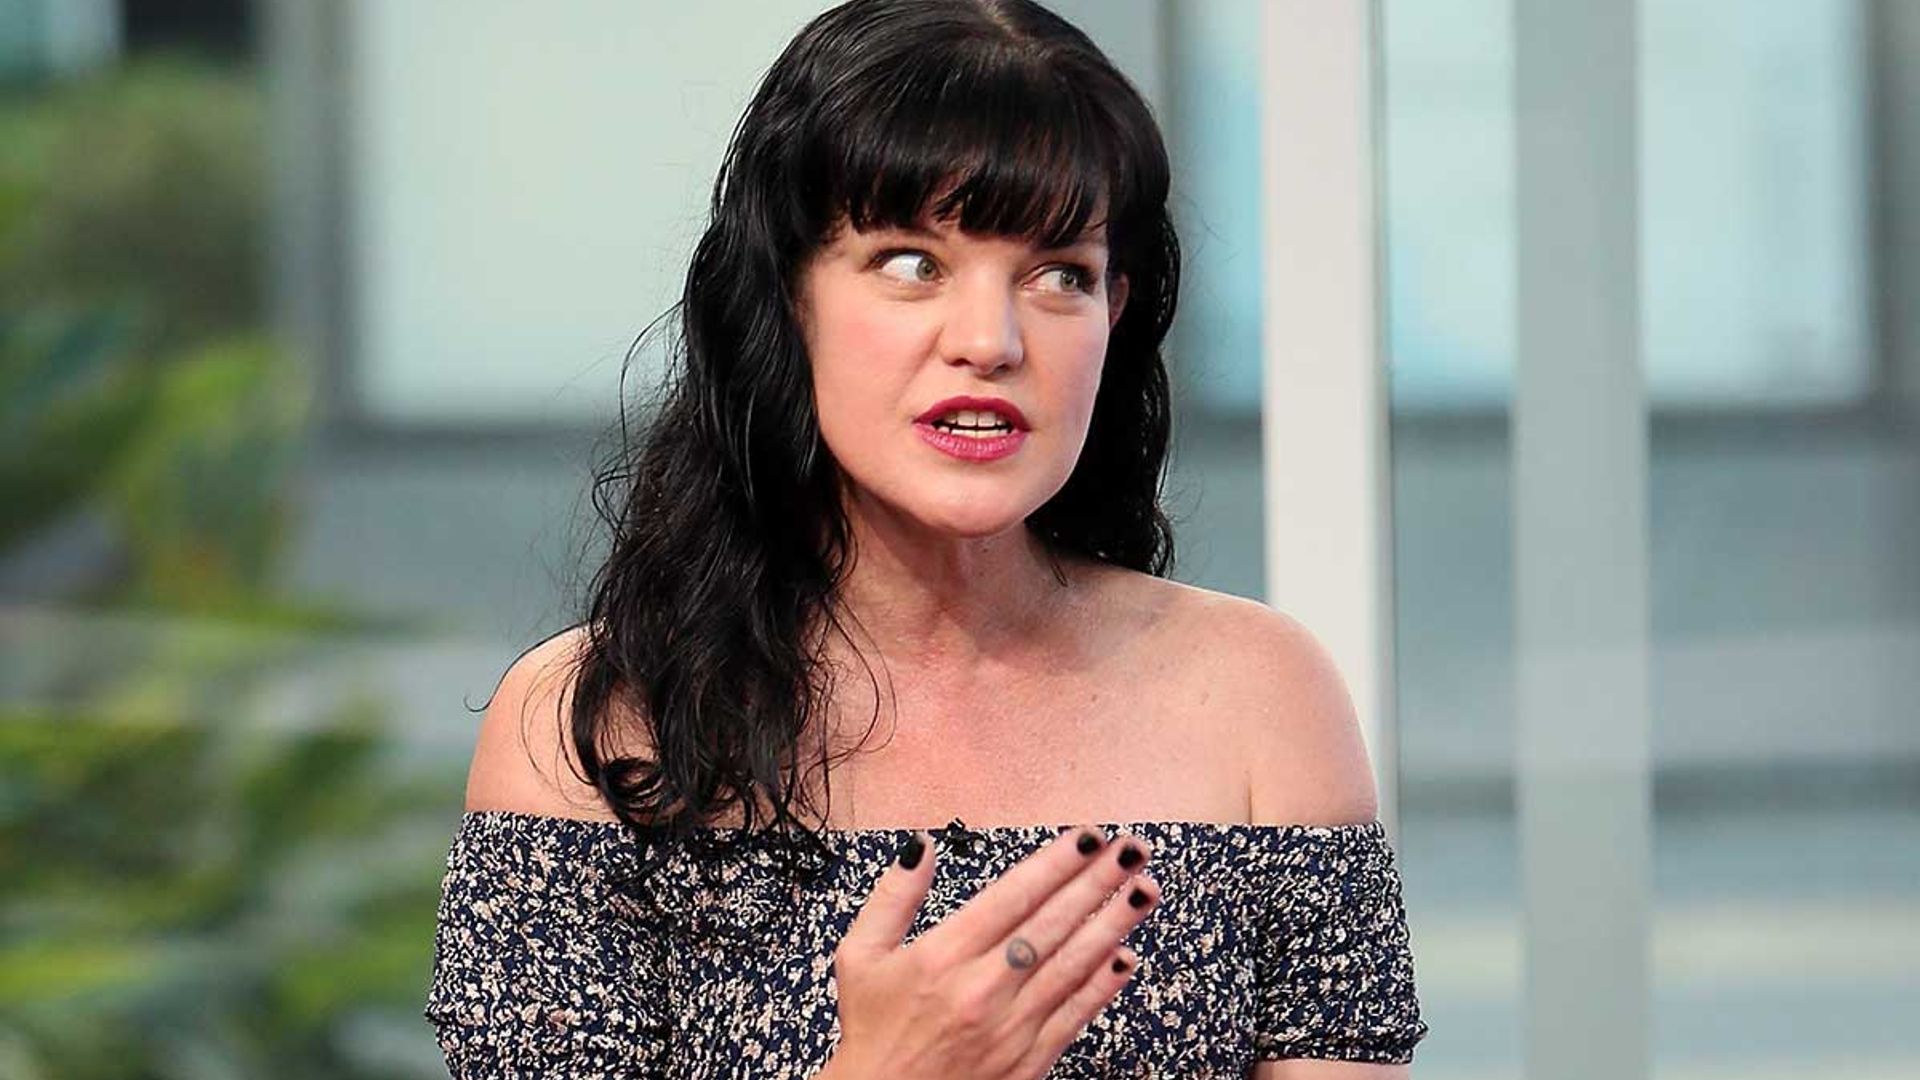 Pauley Perrette shares her anger over new Wayfair commercial - but fans are divided